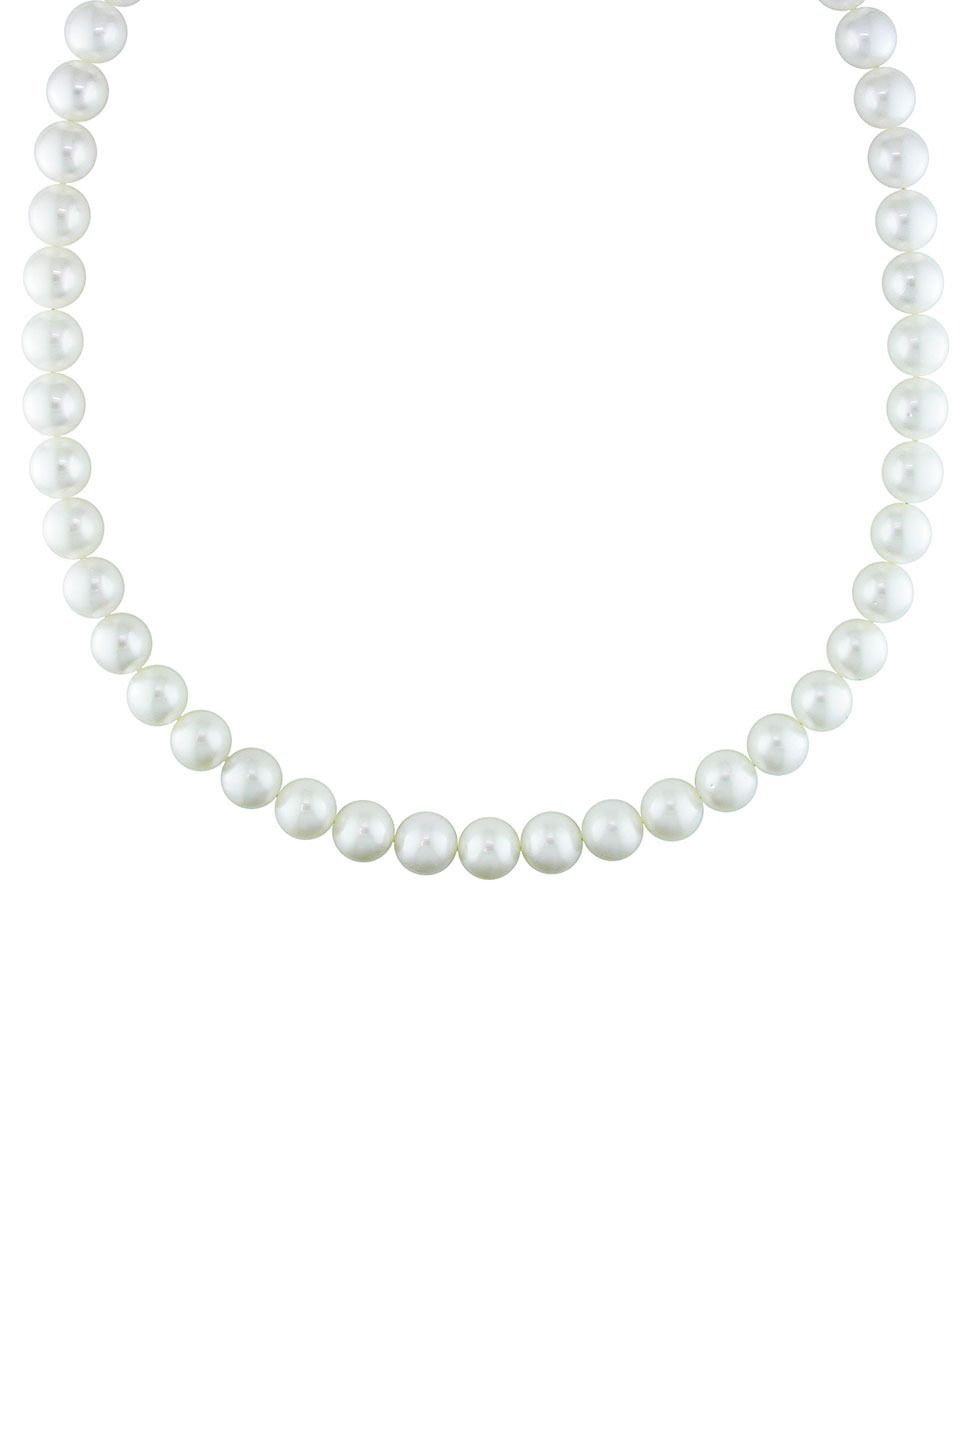 Pearl Necklace Porn
 Tahitian Pearl 9 10mm White South Sea Pearl & Diamond